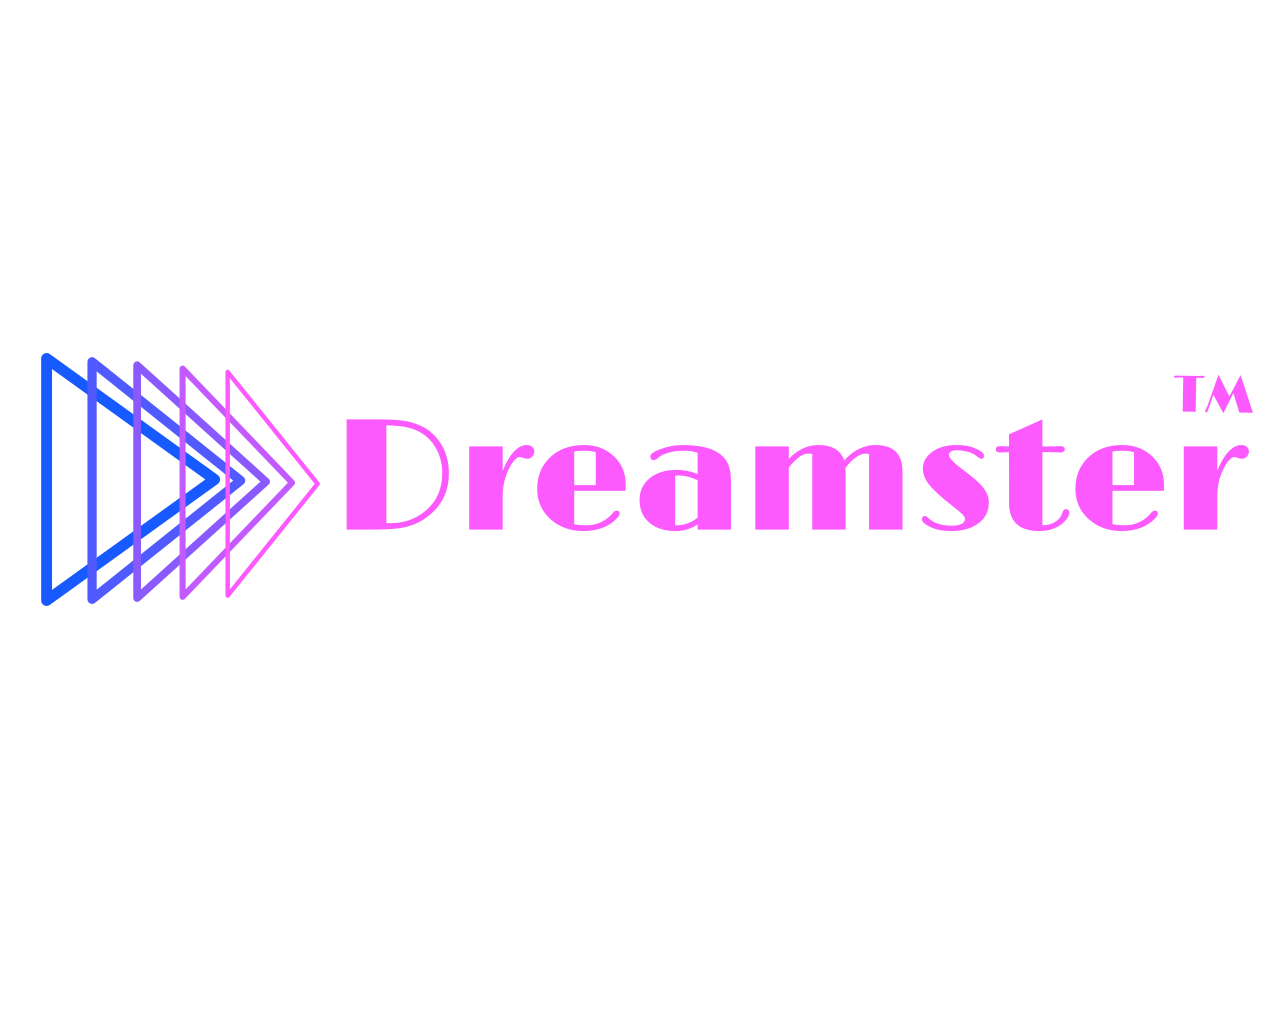 Dreamster presents a ground-breaking opportunity for users in the NFT space